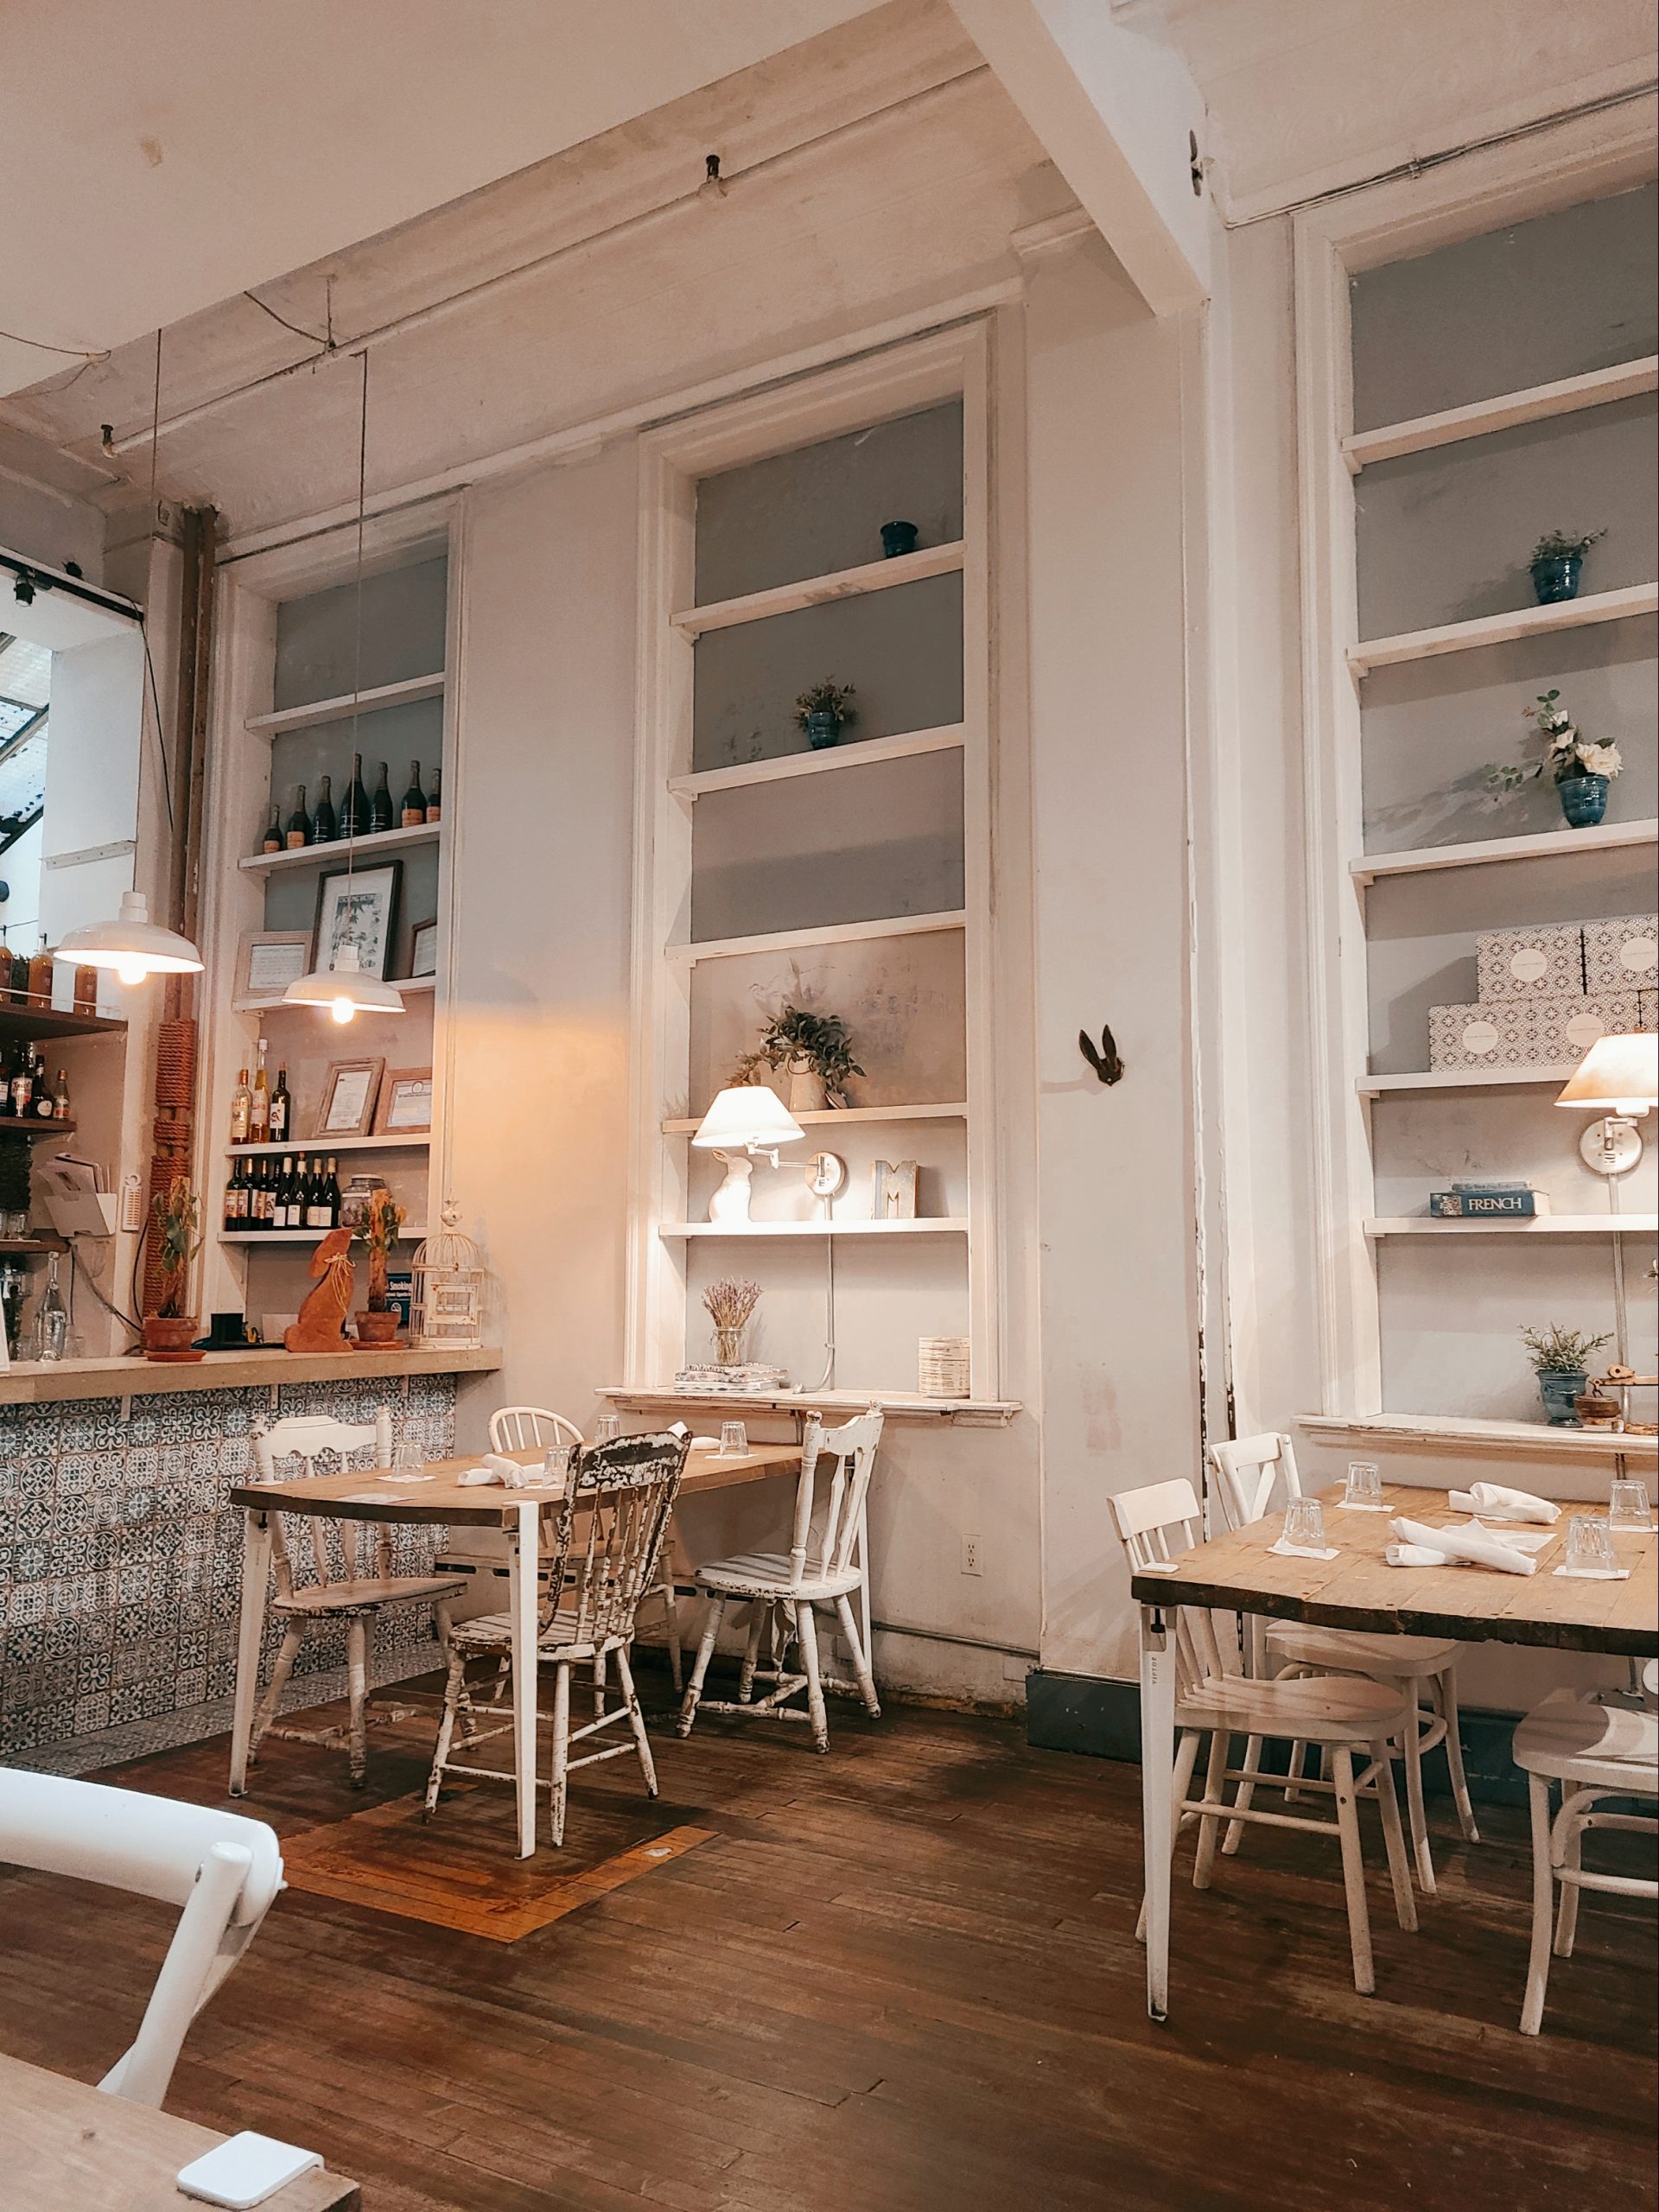 A photo of the interior of Maman cafe, several white tables and chairs are spaced around the room 